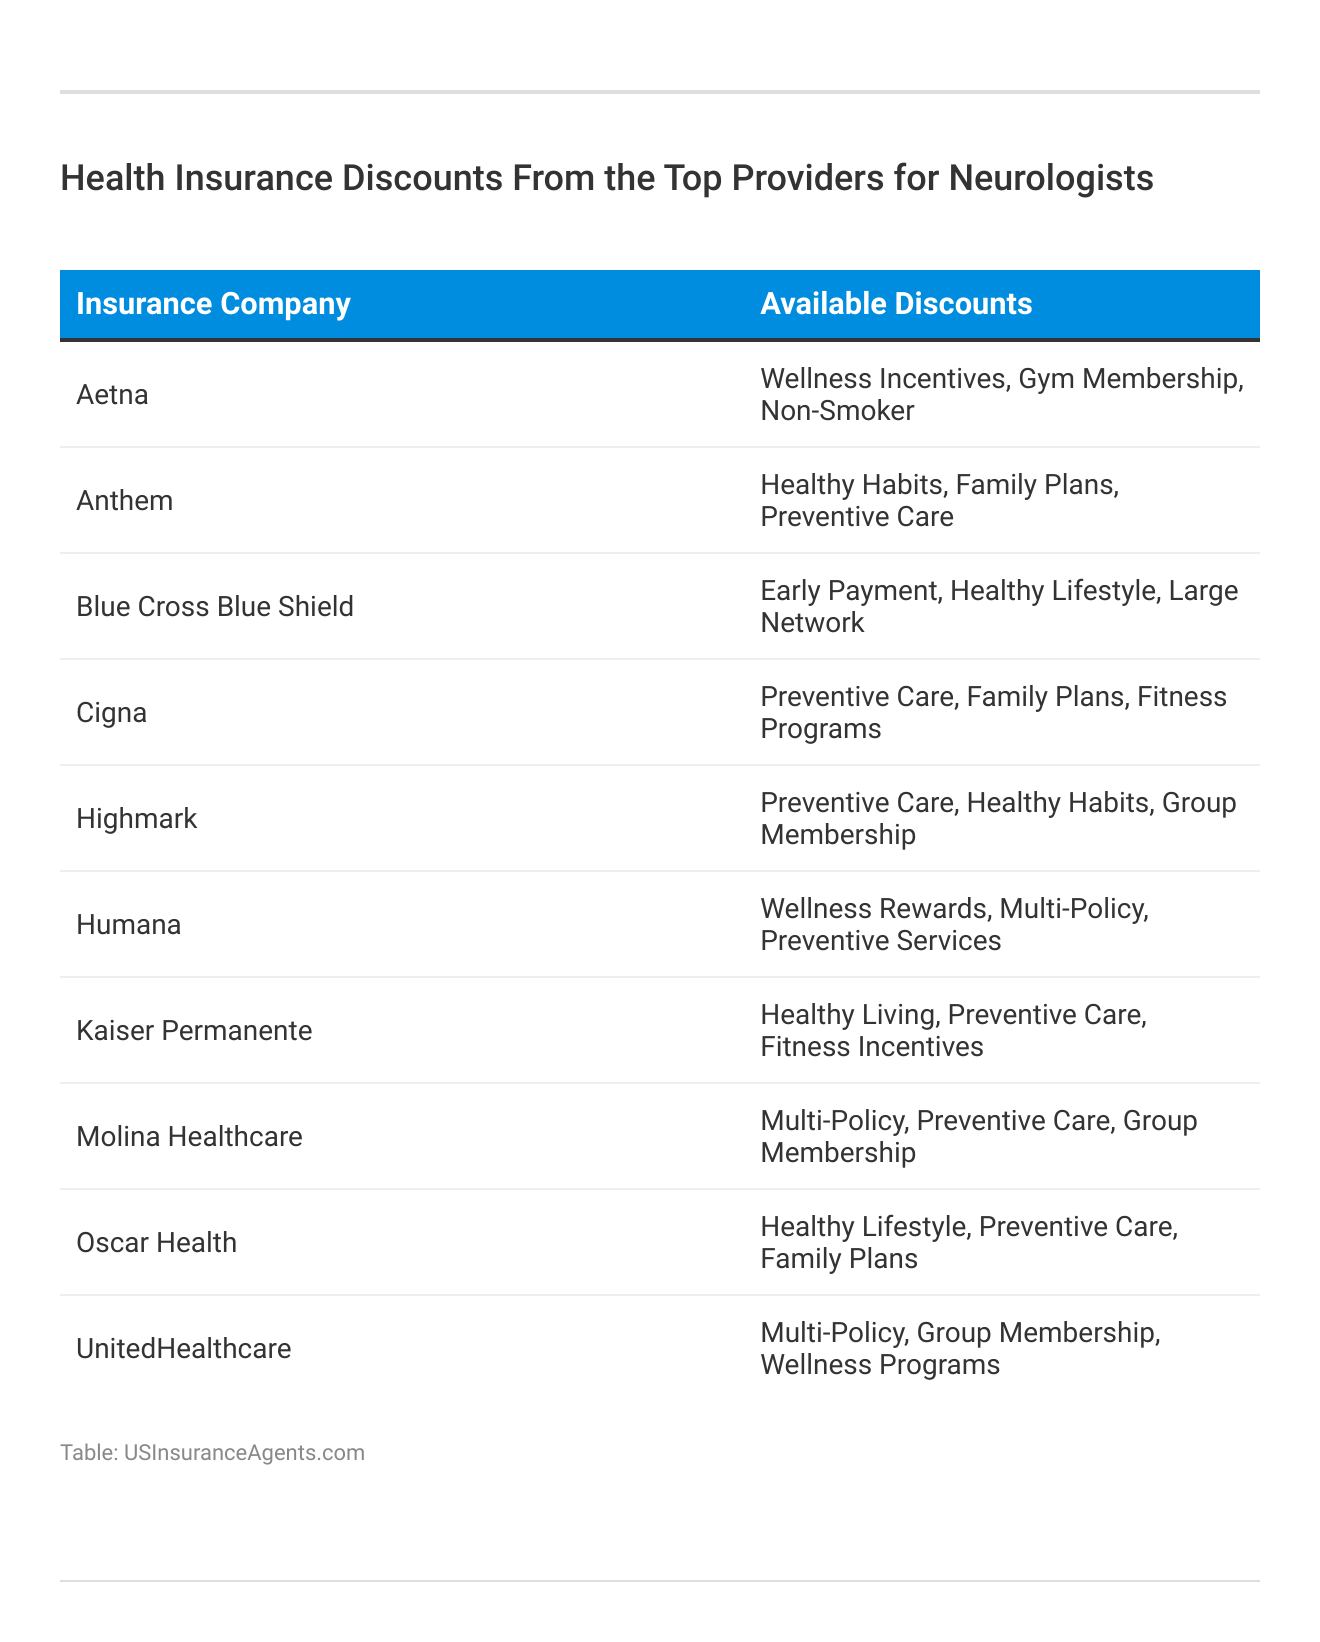 <h3>Health Insurance Discounts From the Top Providers for Neurologists</h3>